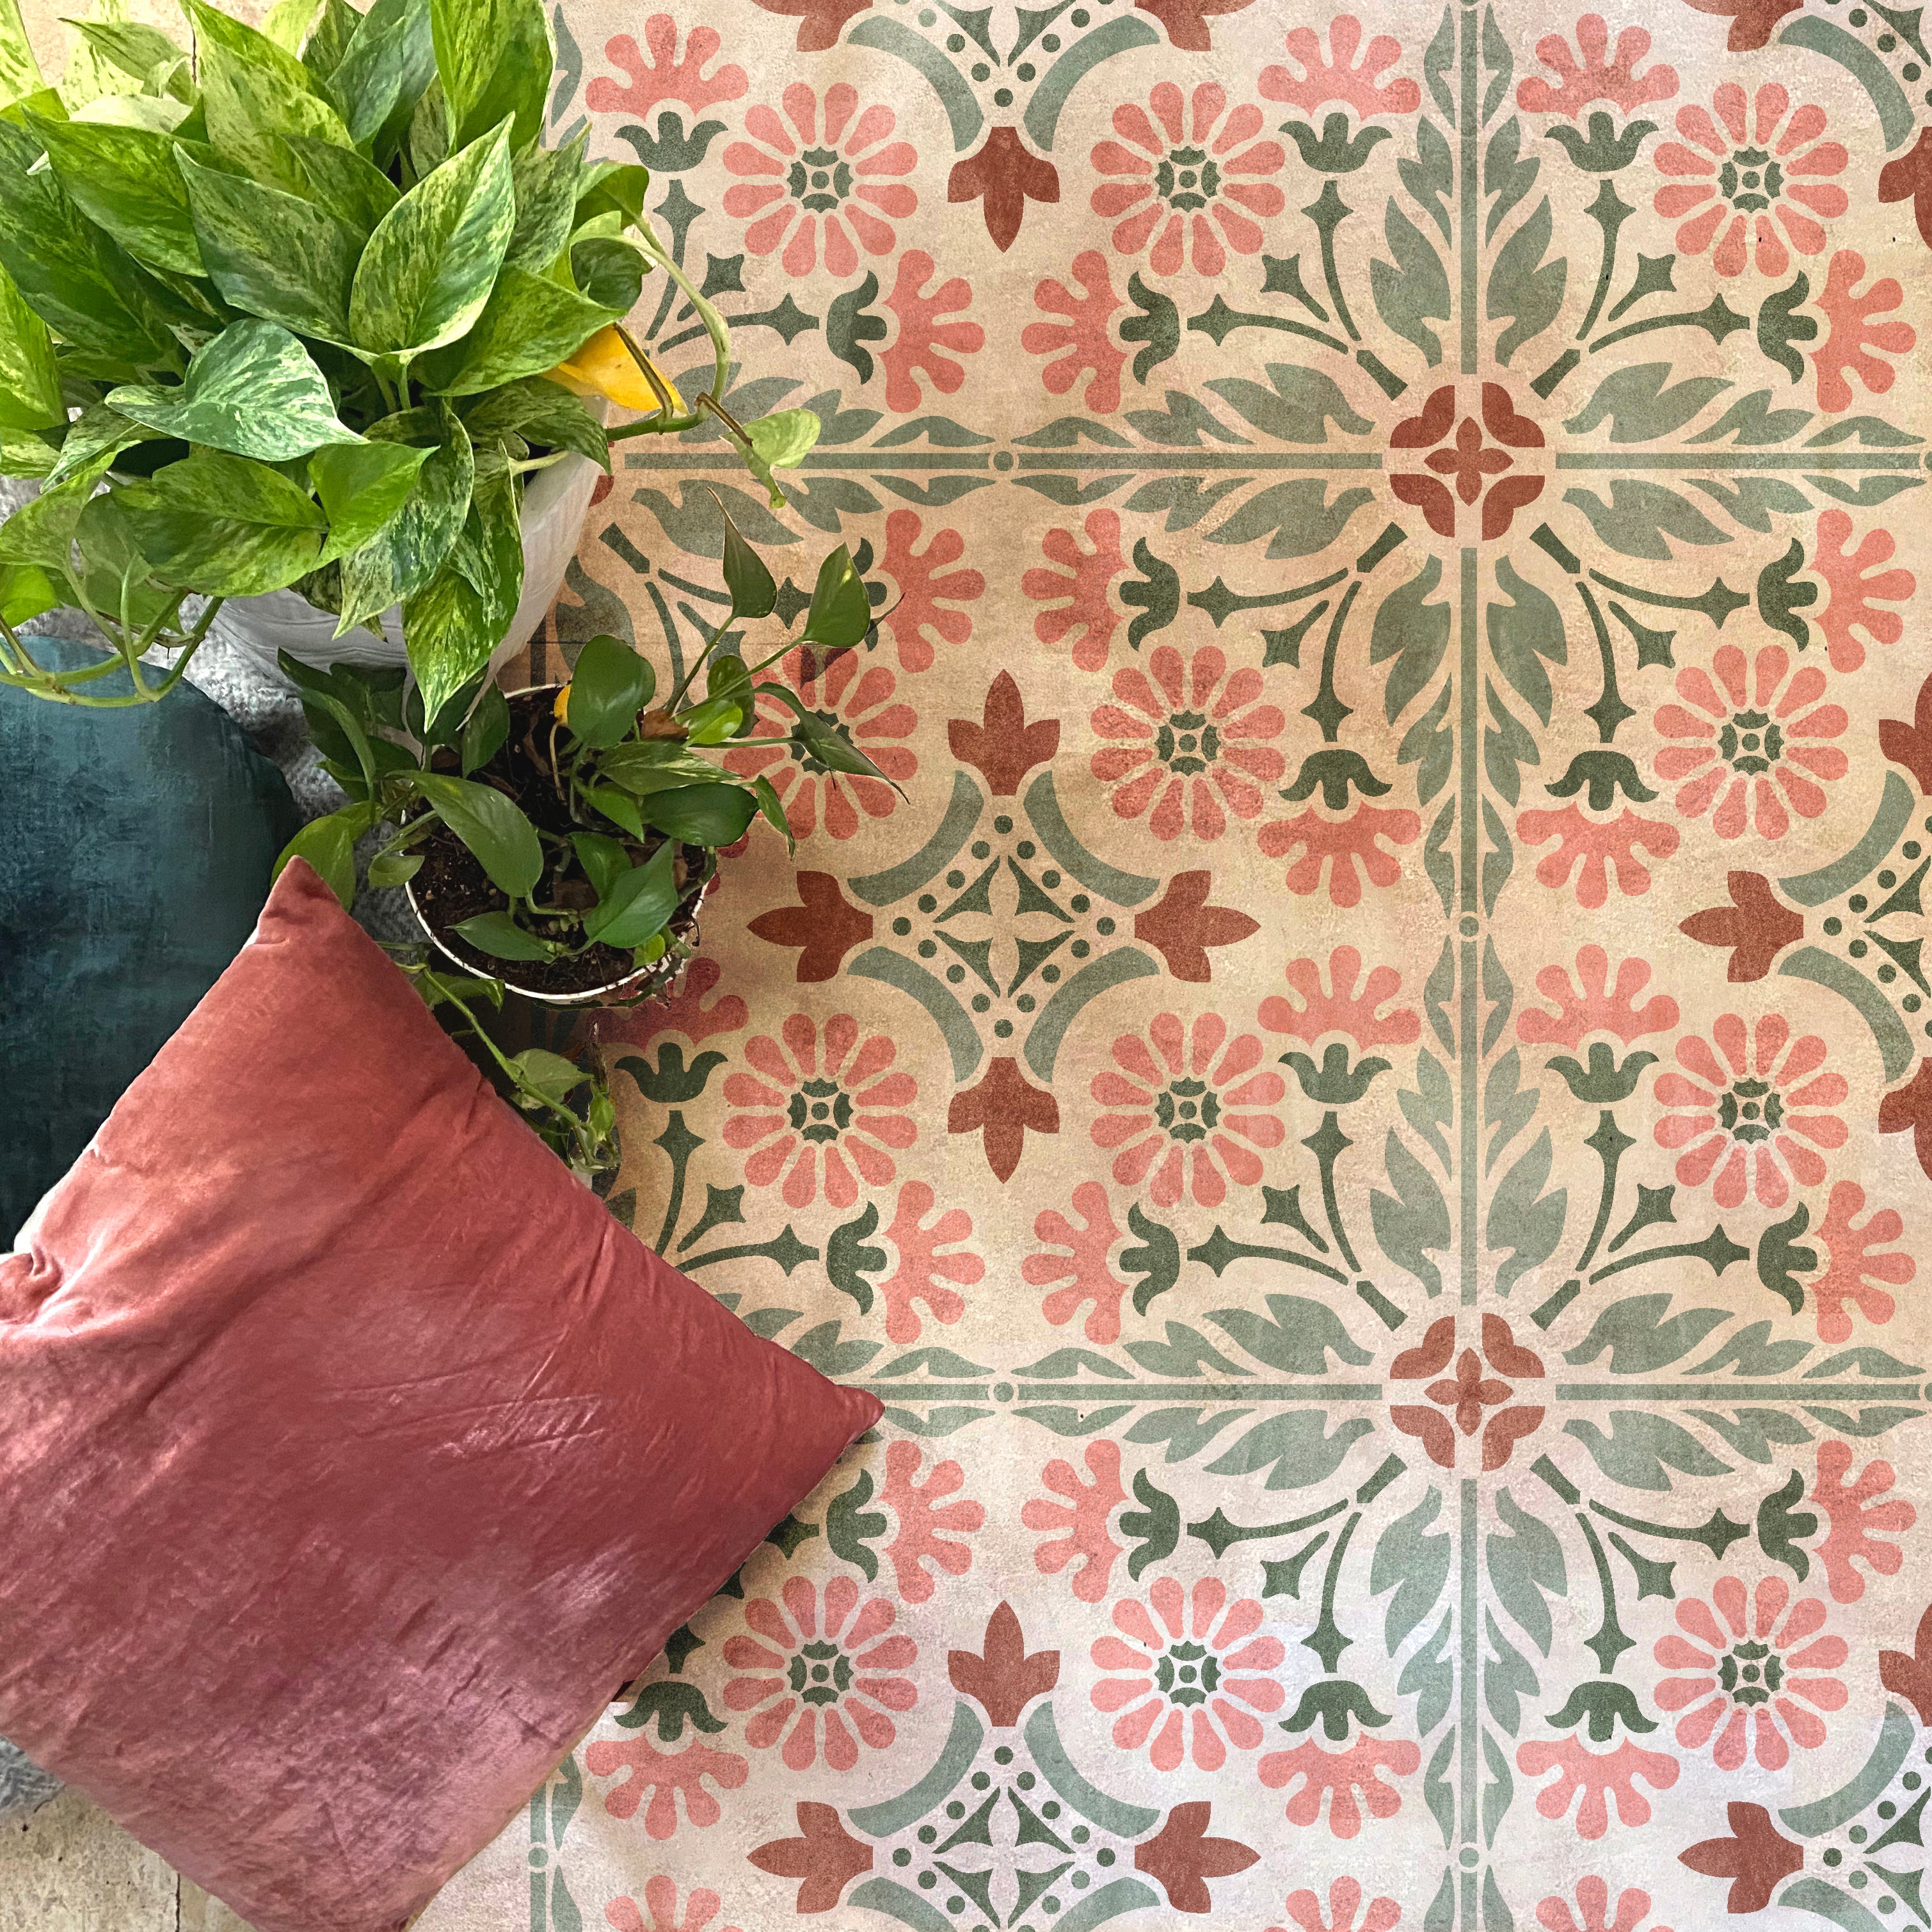 How to Stencil Our Pretty Country Floral Tile in 4 Floor Paint Colors